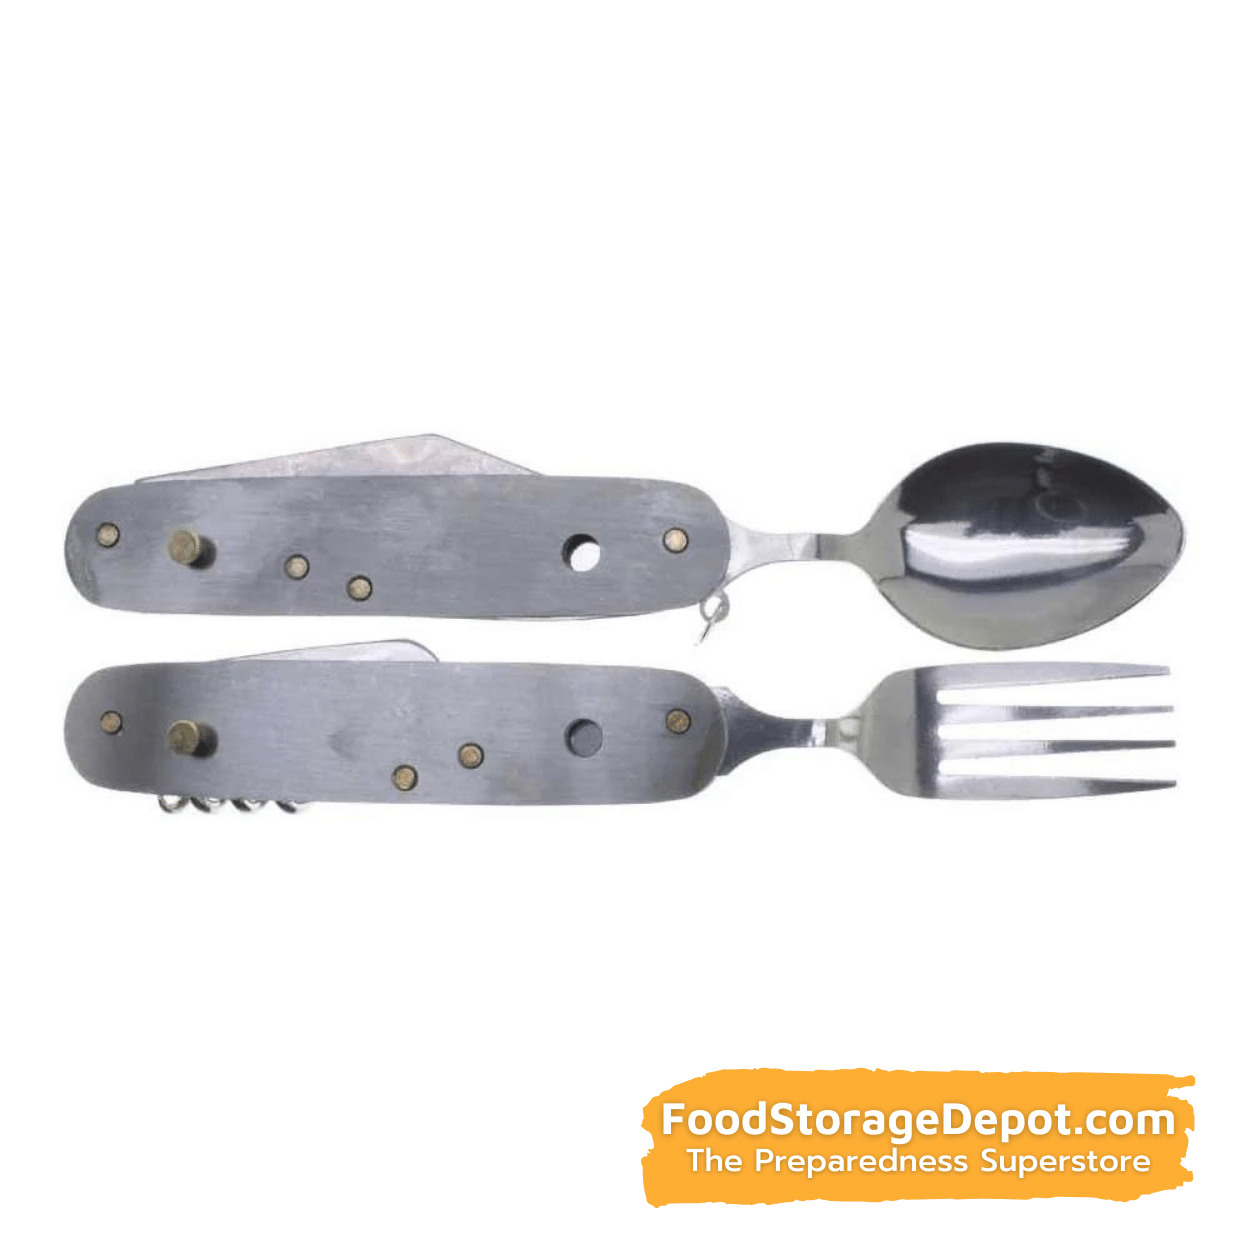 7-in-1 Stainless Steel Multi-Function Camping Tool and Utensils